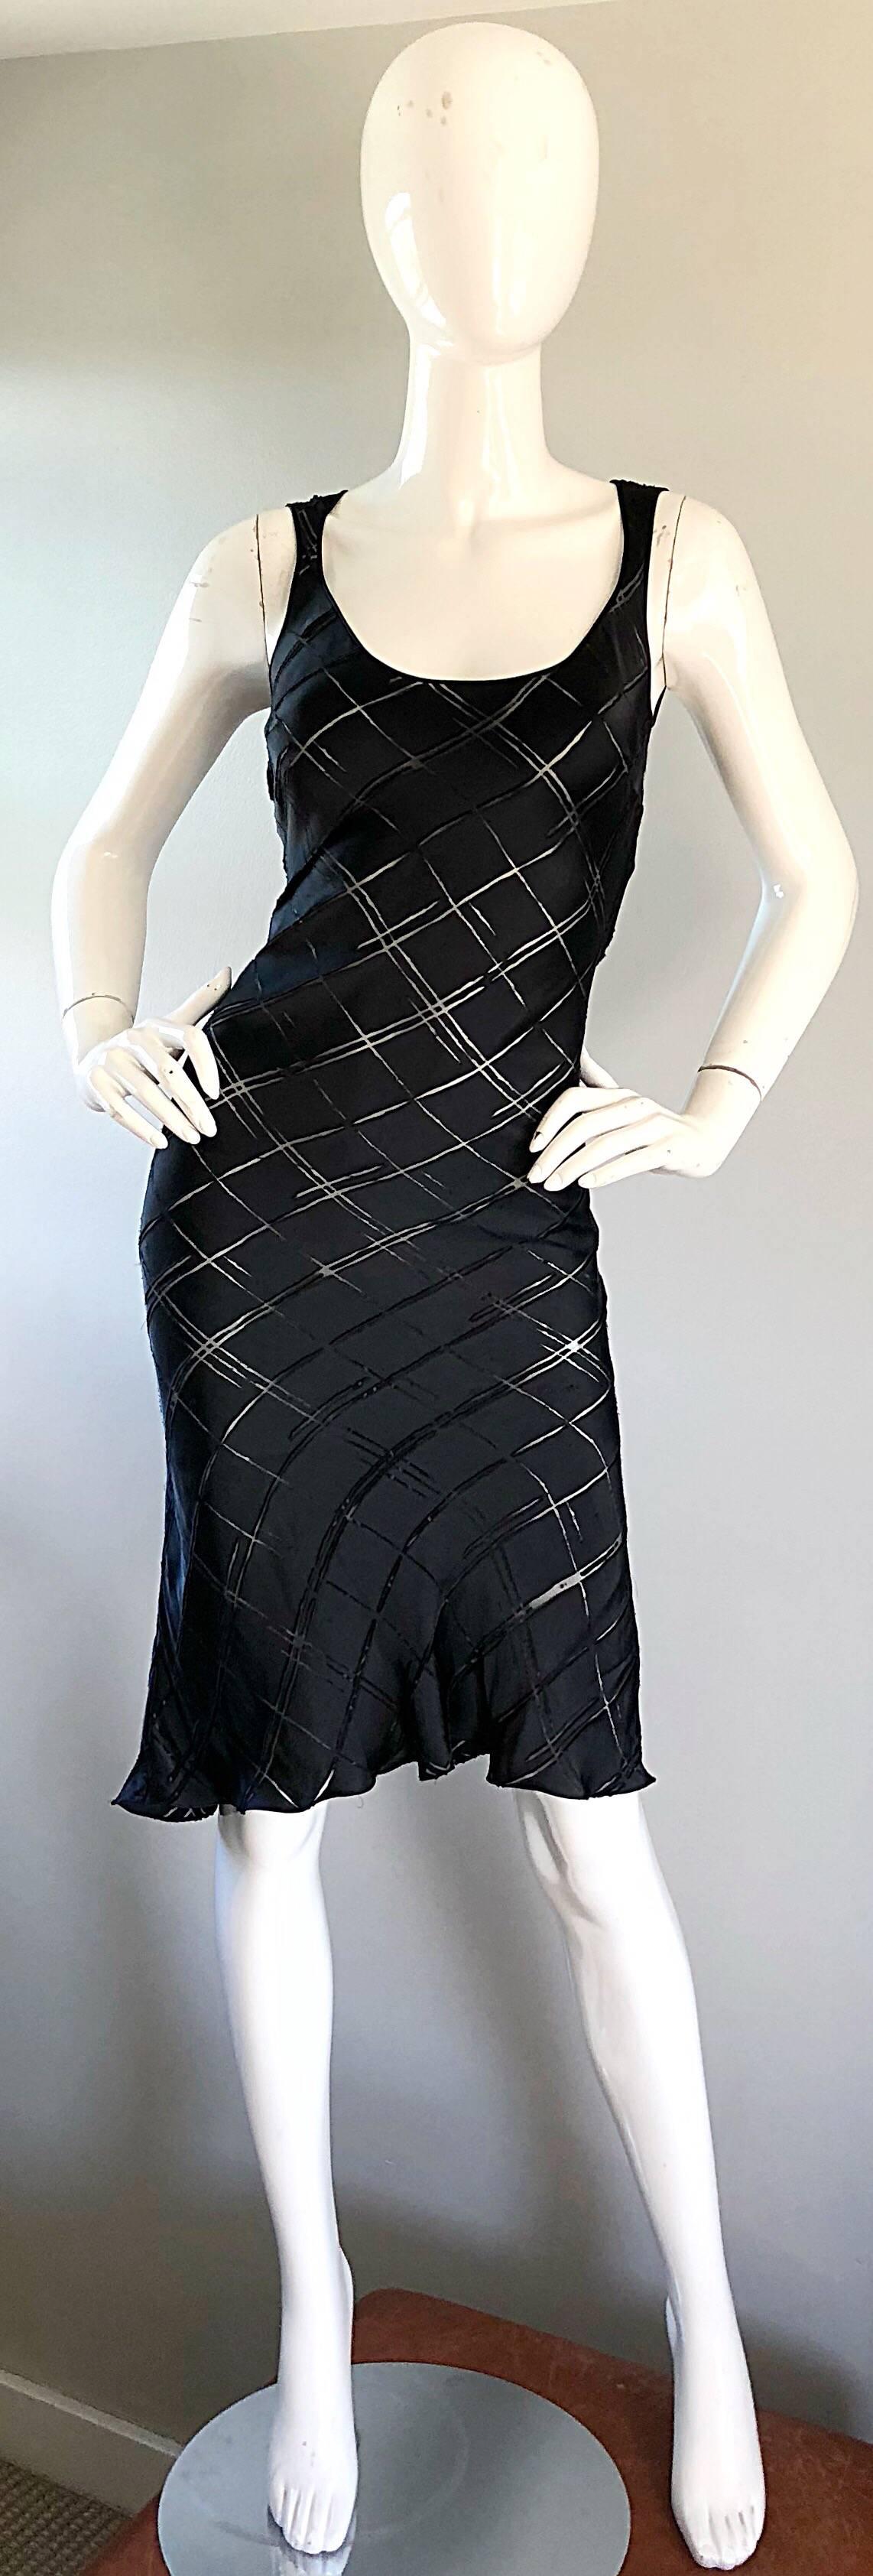 Sexy early 90s vintage JOHN GALLIANO black silk cut-out bias cut slinky slip dress! Features luxurious Italian black silk, with nude chiffon slits throughout. Please note that panels are sheer, not white (looks white because of mannequin).  Simply